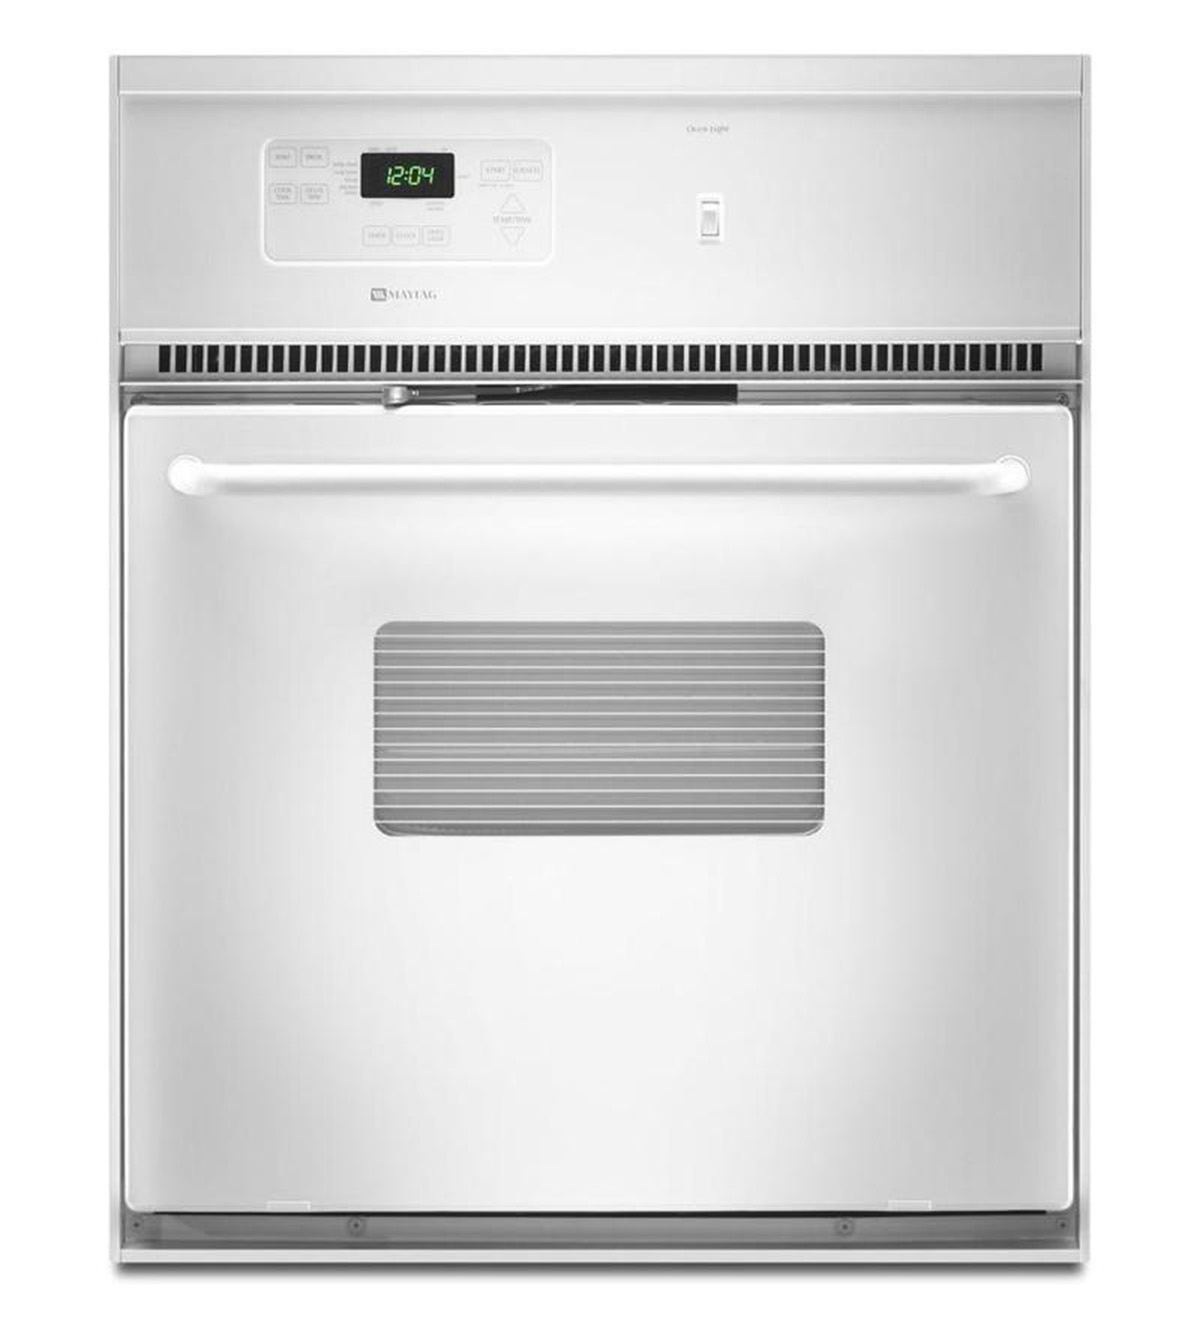 How To Fix The Error Code F5-E6 For Maytag Oven